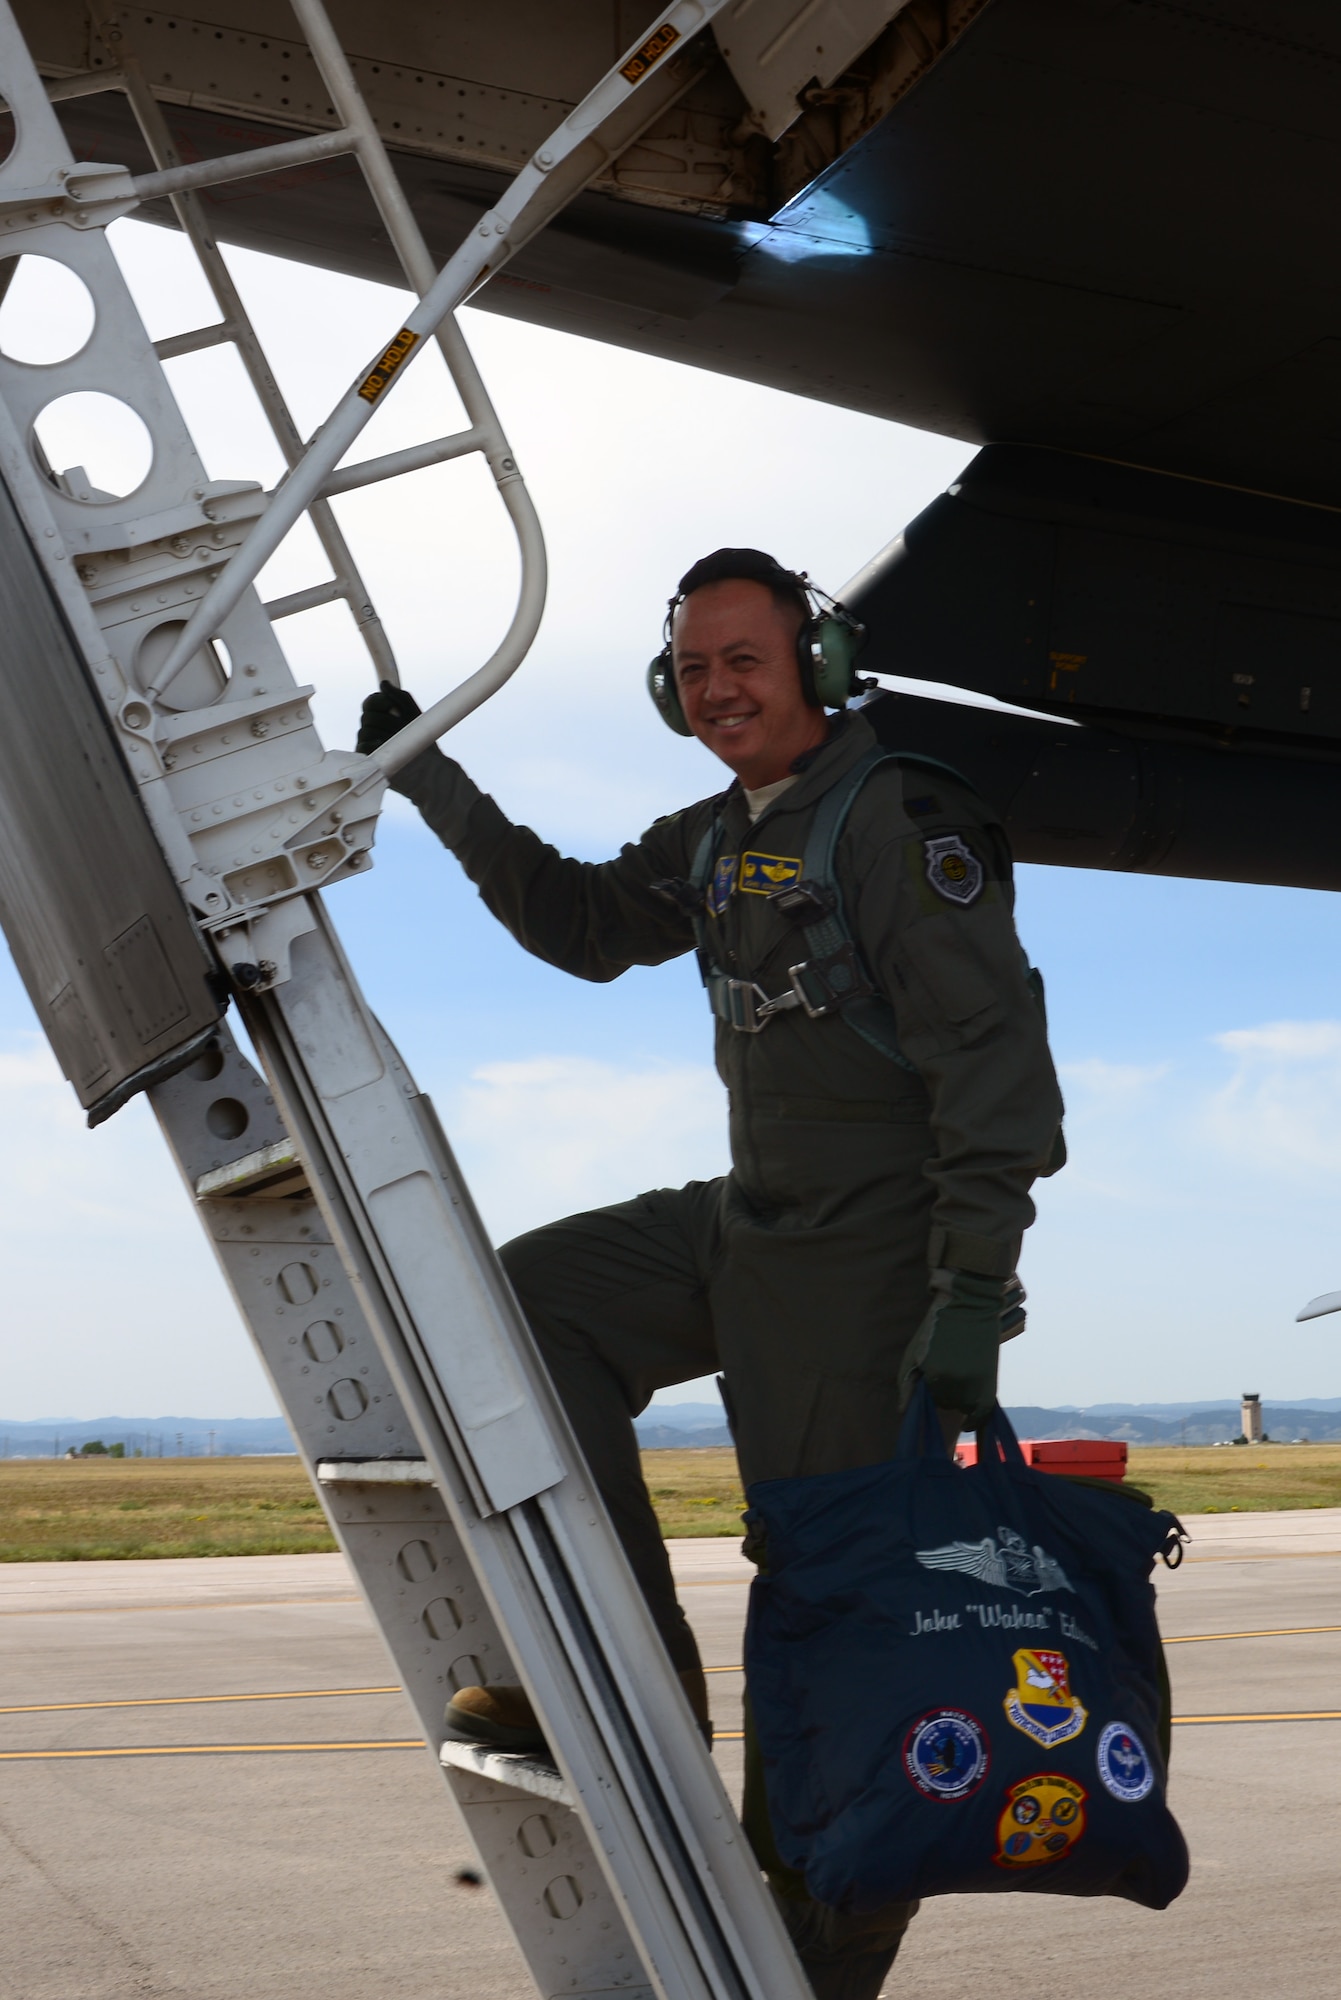 During the flight, the crew’s mission was to simulate performing close air support with the Air Force Joint-Terminal Attack Controllers to deliver weapons against an enemy target within the Powder River Training Complex airspace.